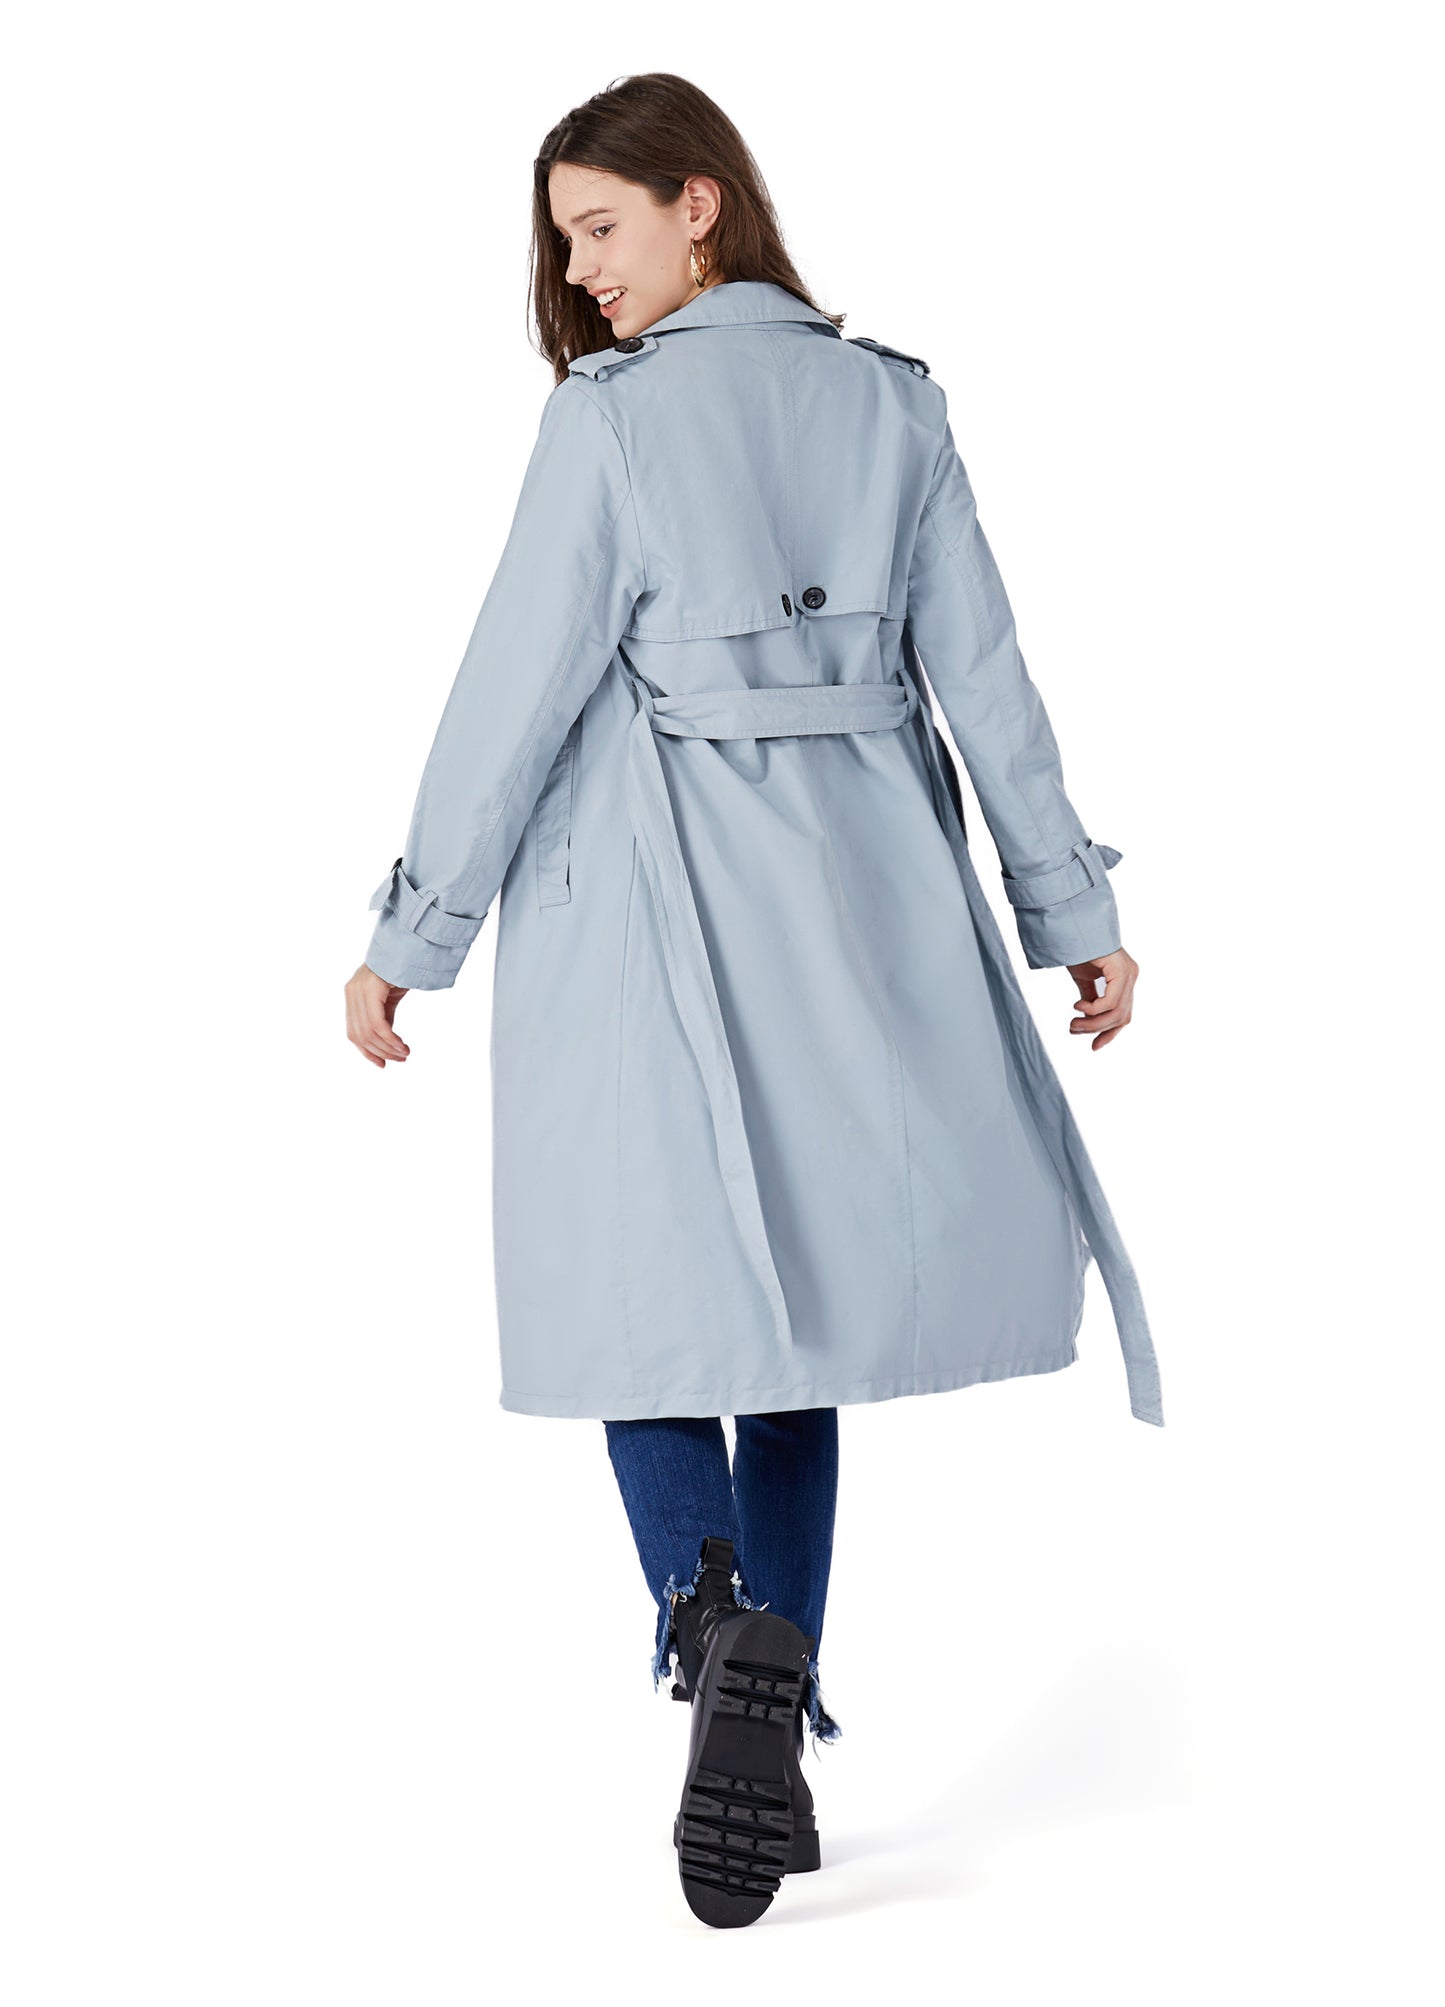 MECALA Women's Fall Long Trench Coat Double Breasted Windproof Overcoat